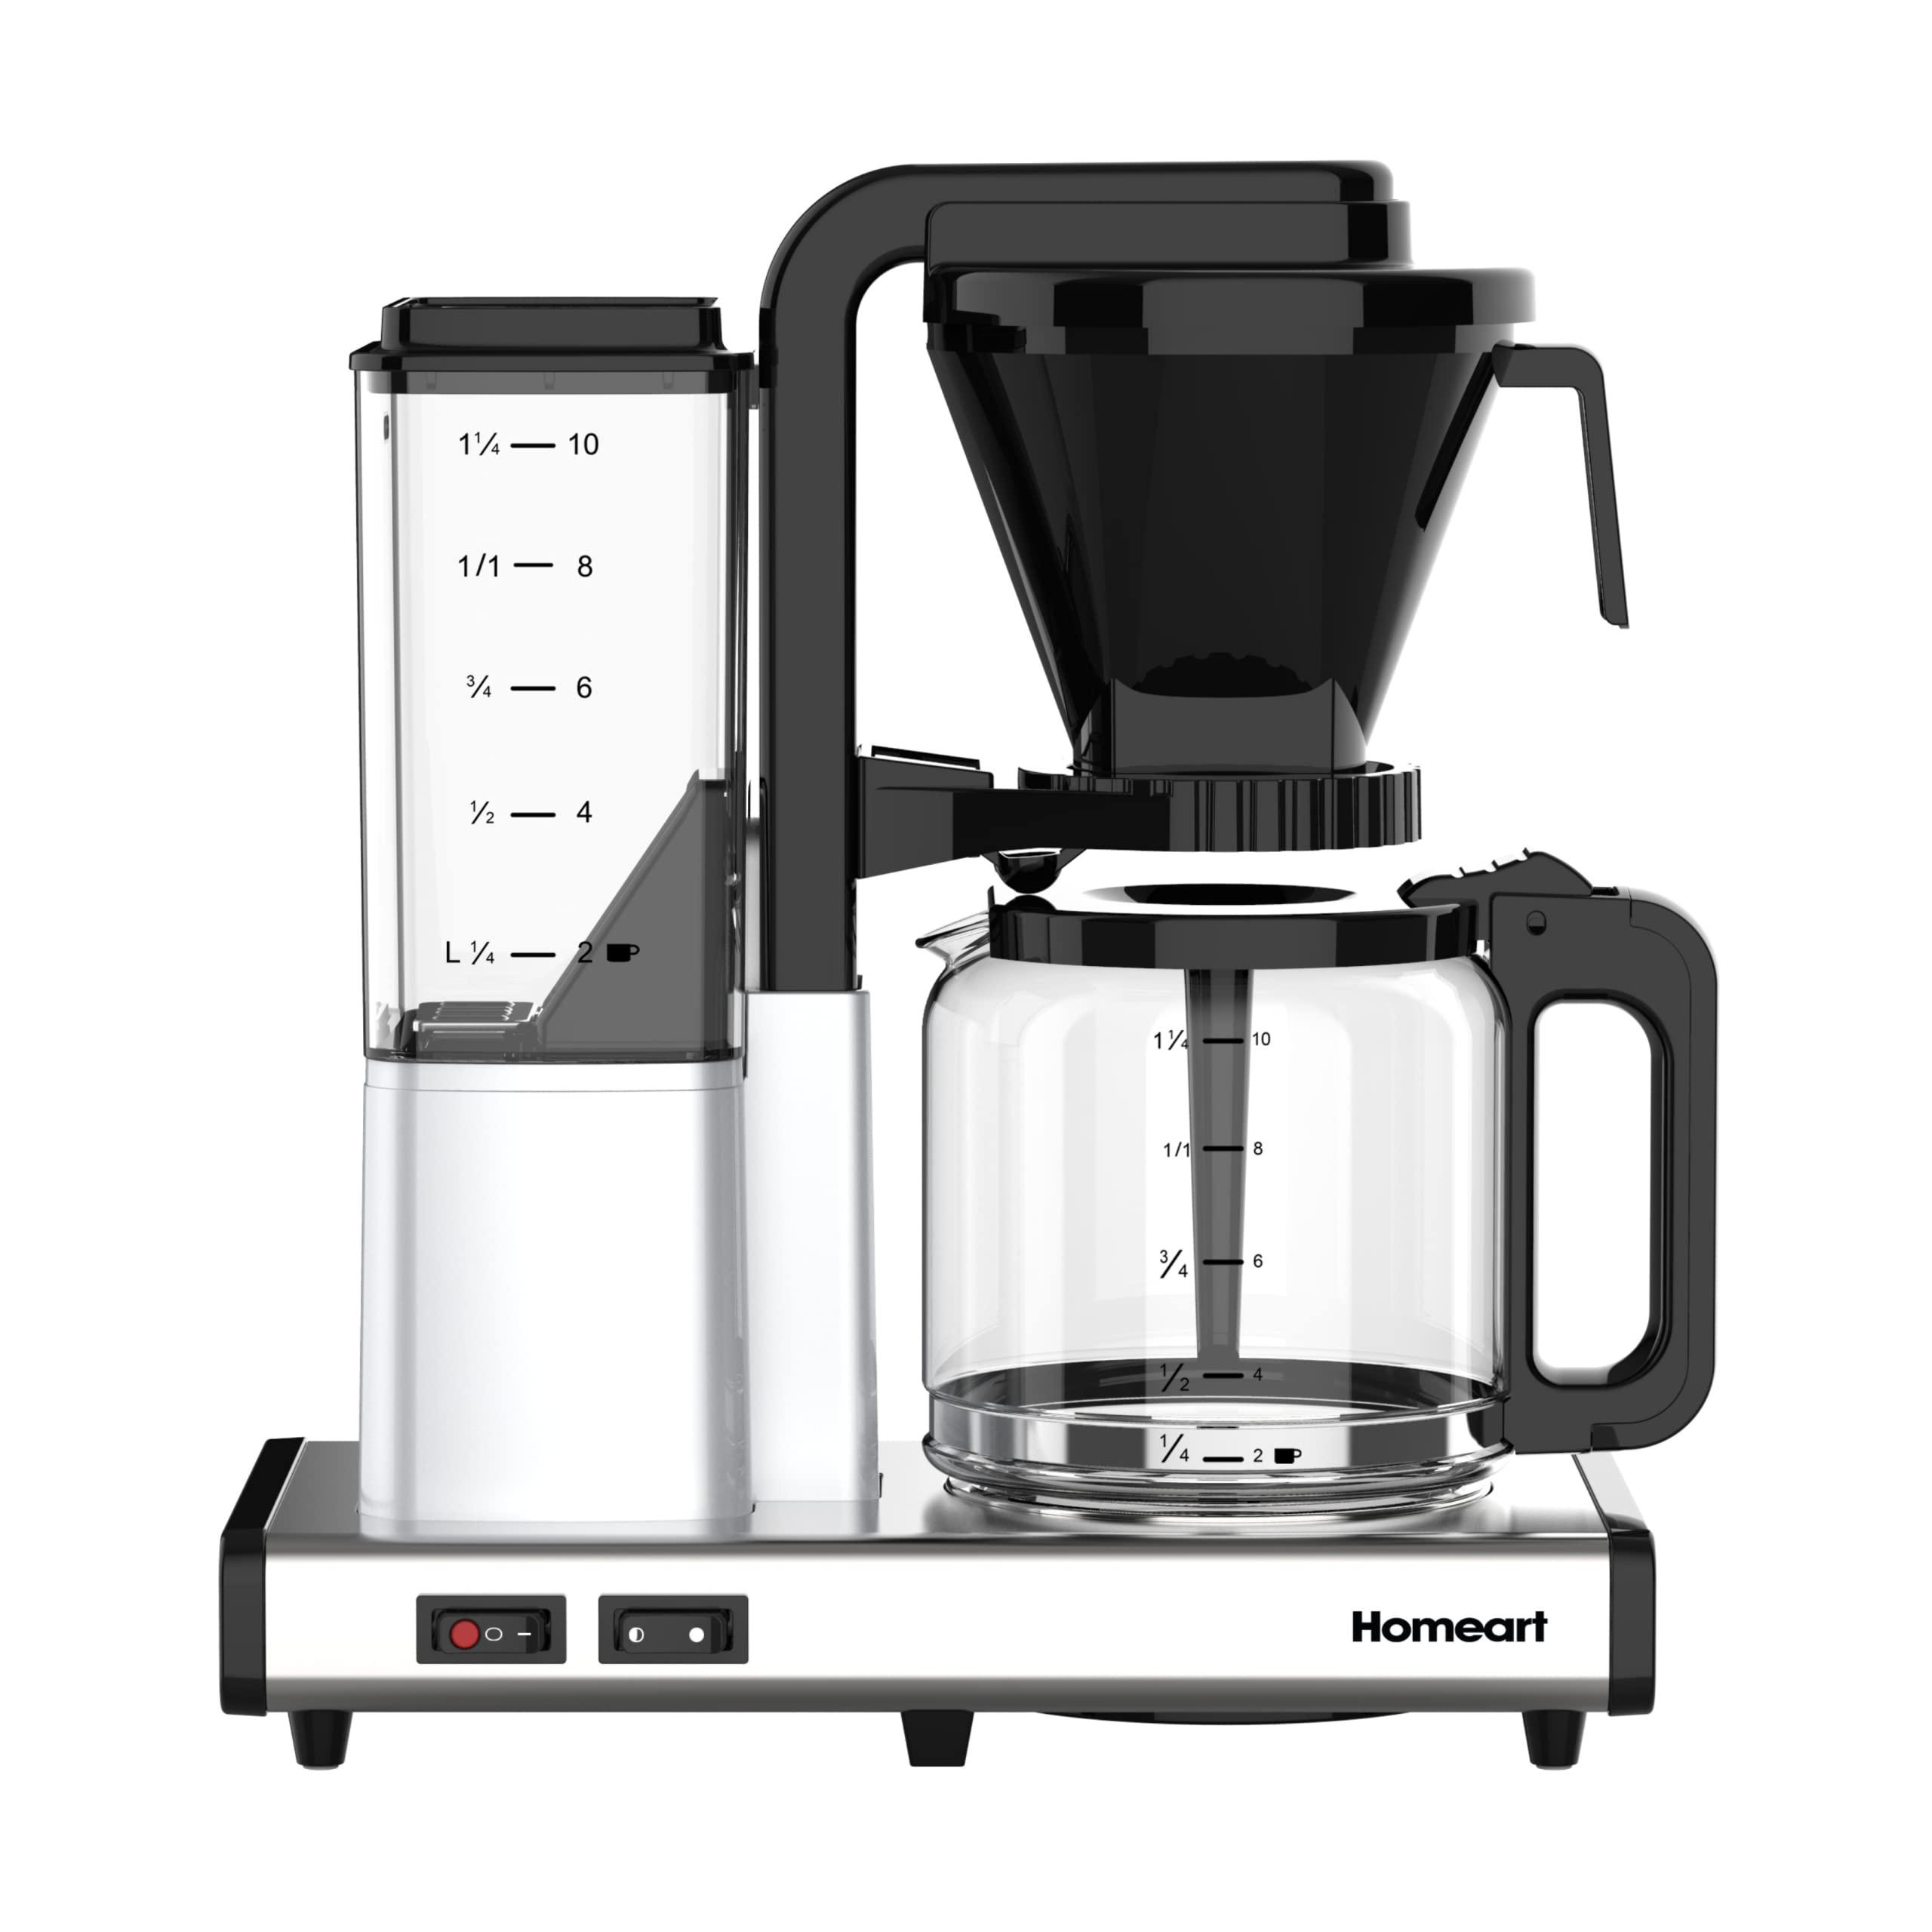 Homeart RNAB0BL5BMRV7 homeart coffee virtuoso gourmet coffee maker with  automatic anti drip, auto shut-off & removable filter holder, makes 12 cups